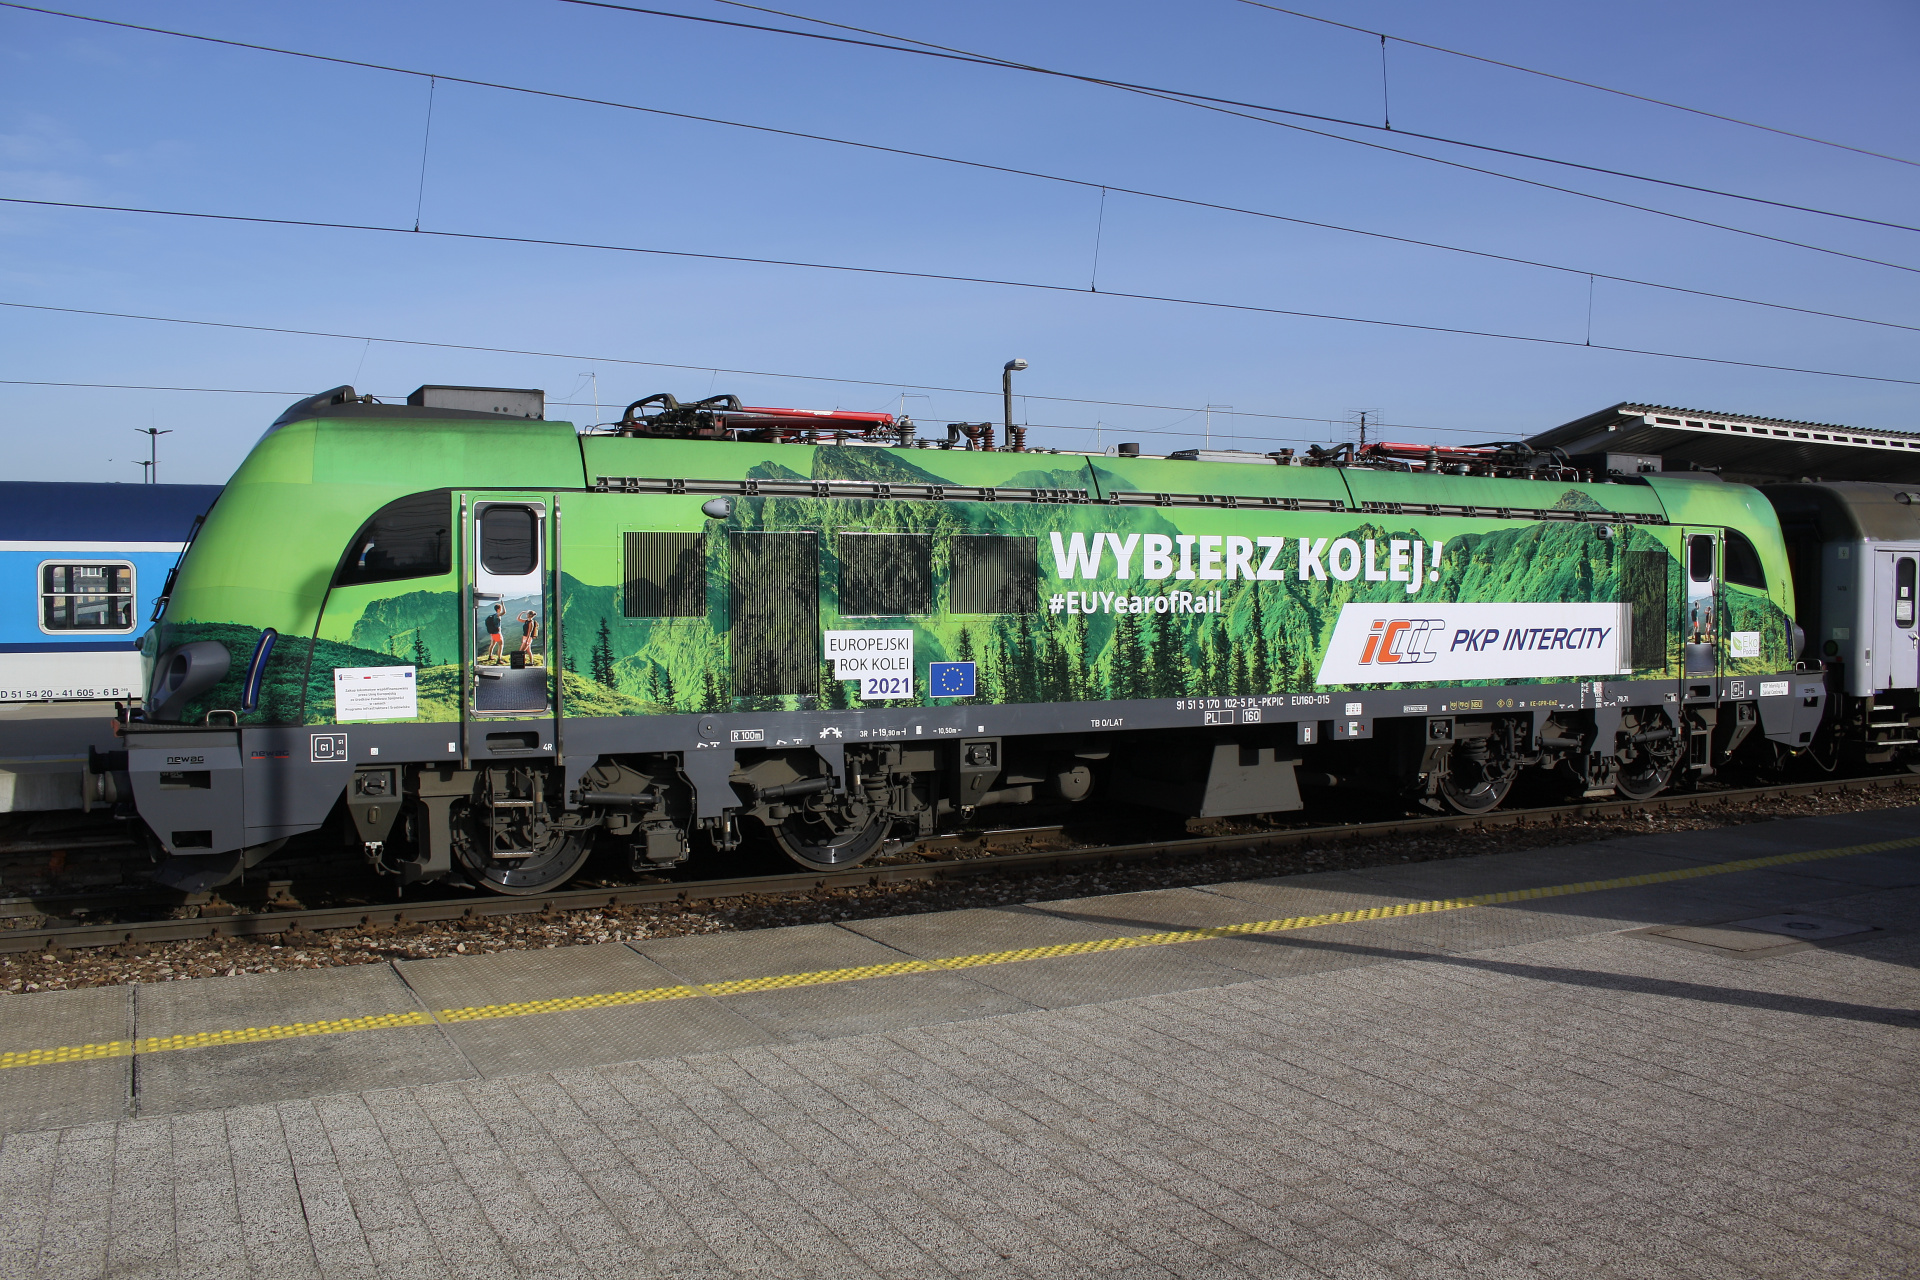 E4DCU EU160-015 (European Year of the Rail 2021 livery) (Vehicles » Trains and Locomotives » Newag Griffin)